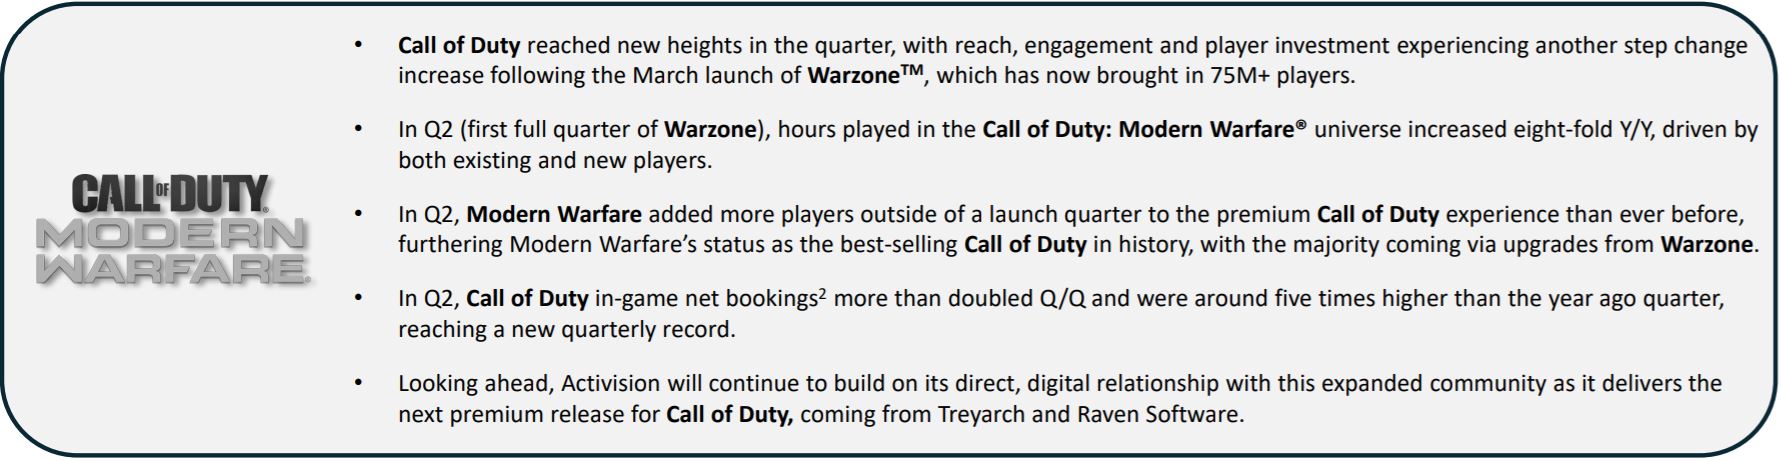 Activision earnings call